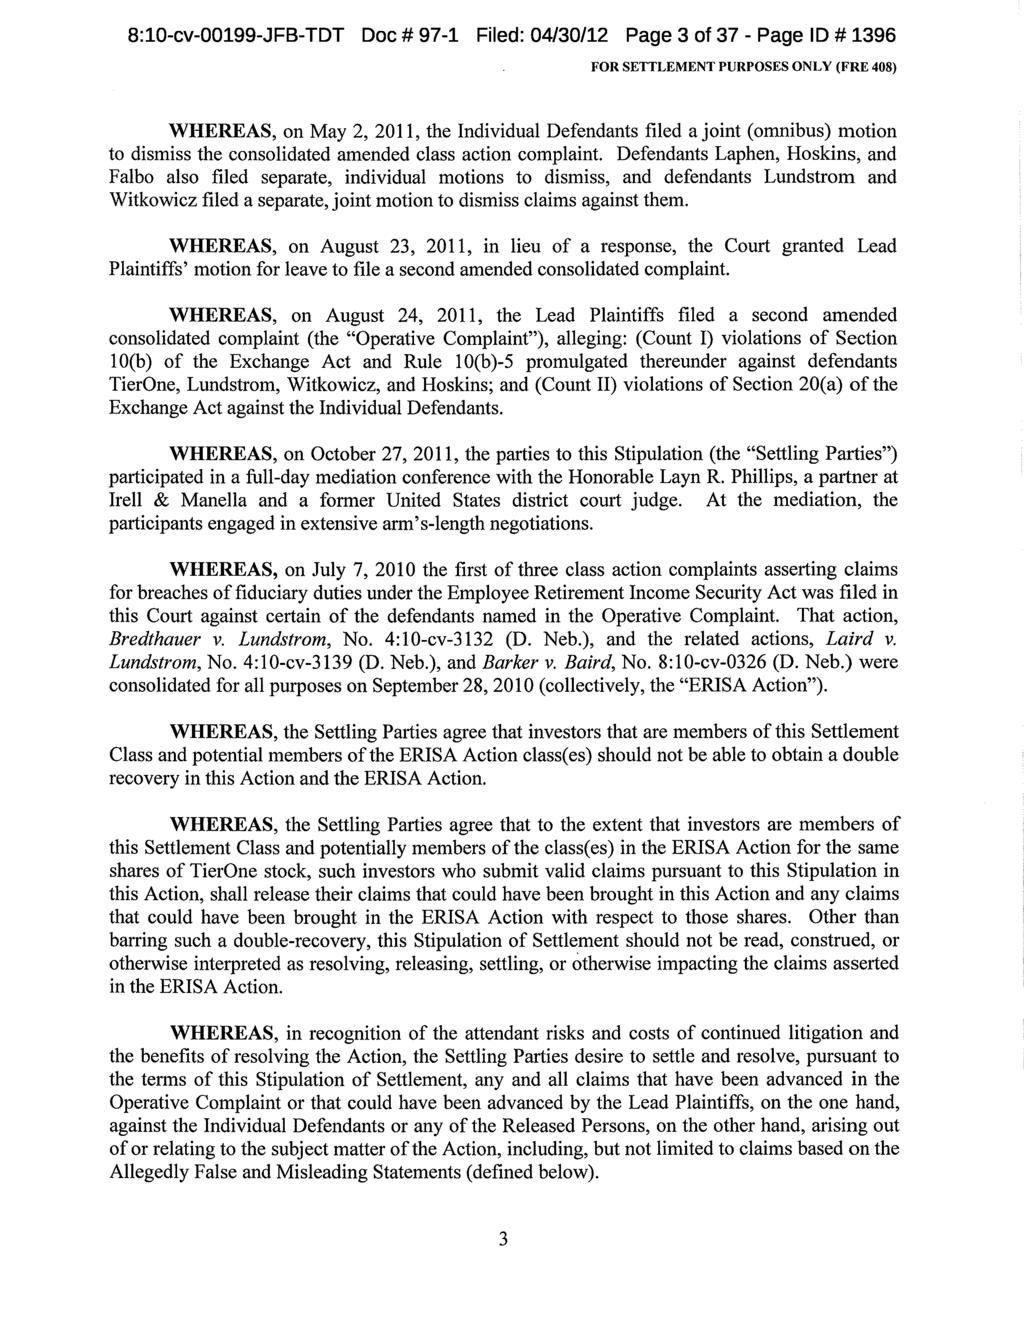 8:10-cv-00199-JFB-TDT Doc # 97-1 Filed: 04/30/12 Page 3 of 37 - Page ID # 1396 WHEREAS, on May 2, 2011, the Individual Defendants filed a joint (omnibus) motion to dismiss the consolidated amended